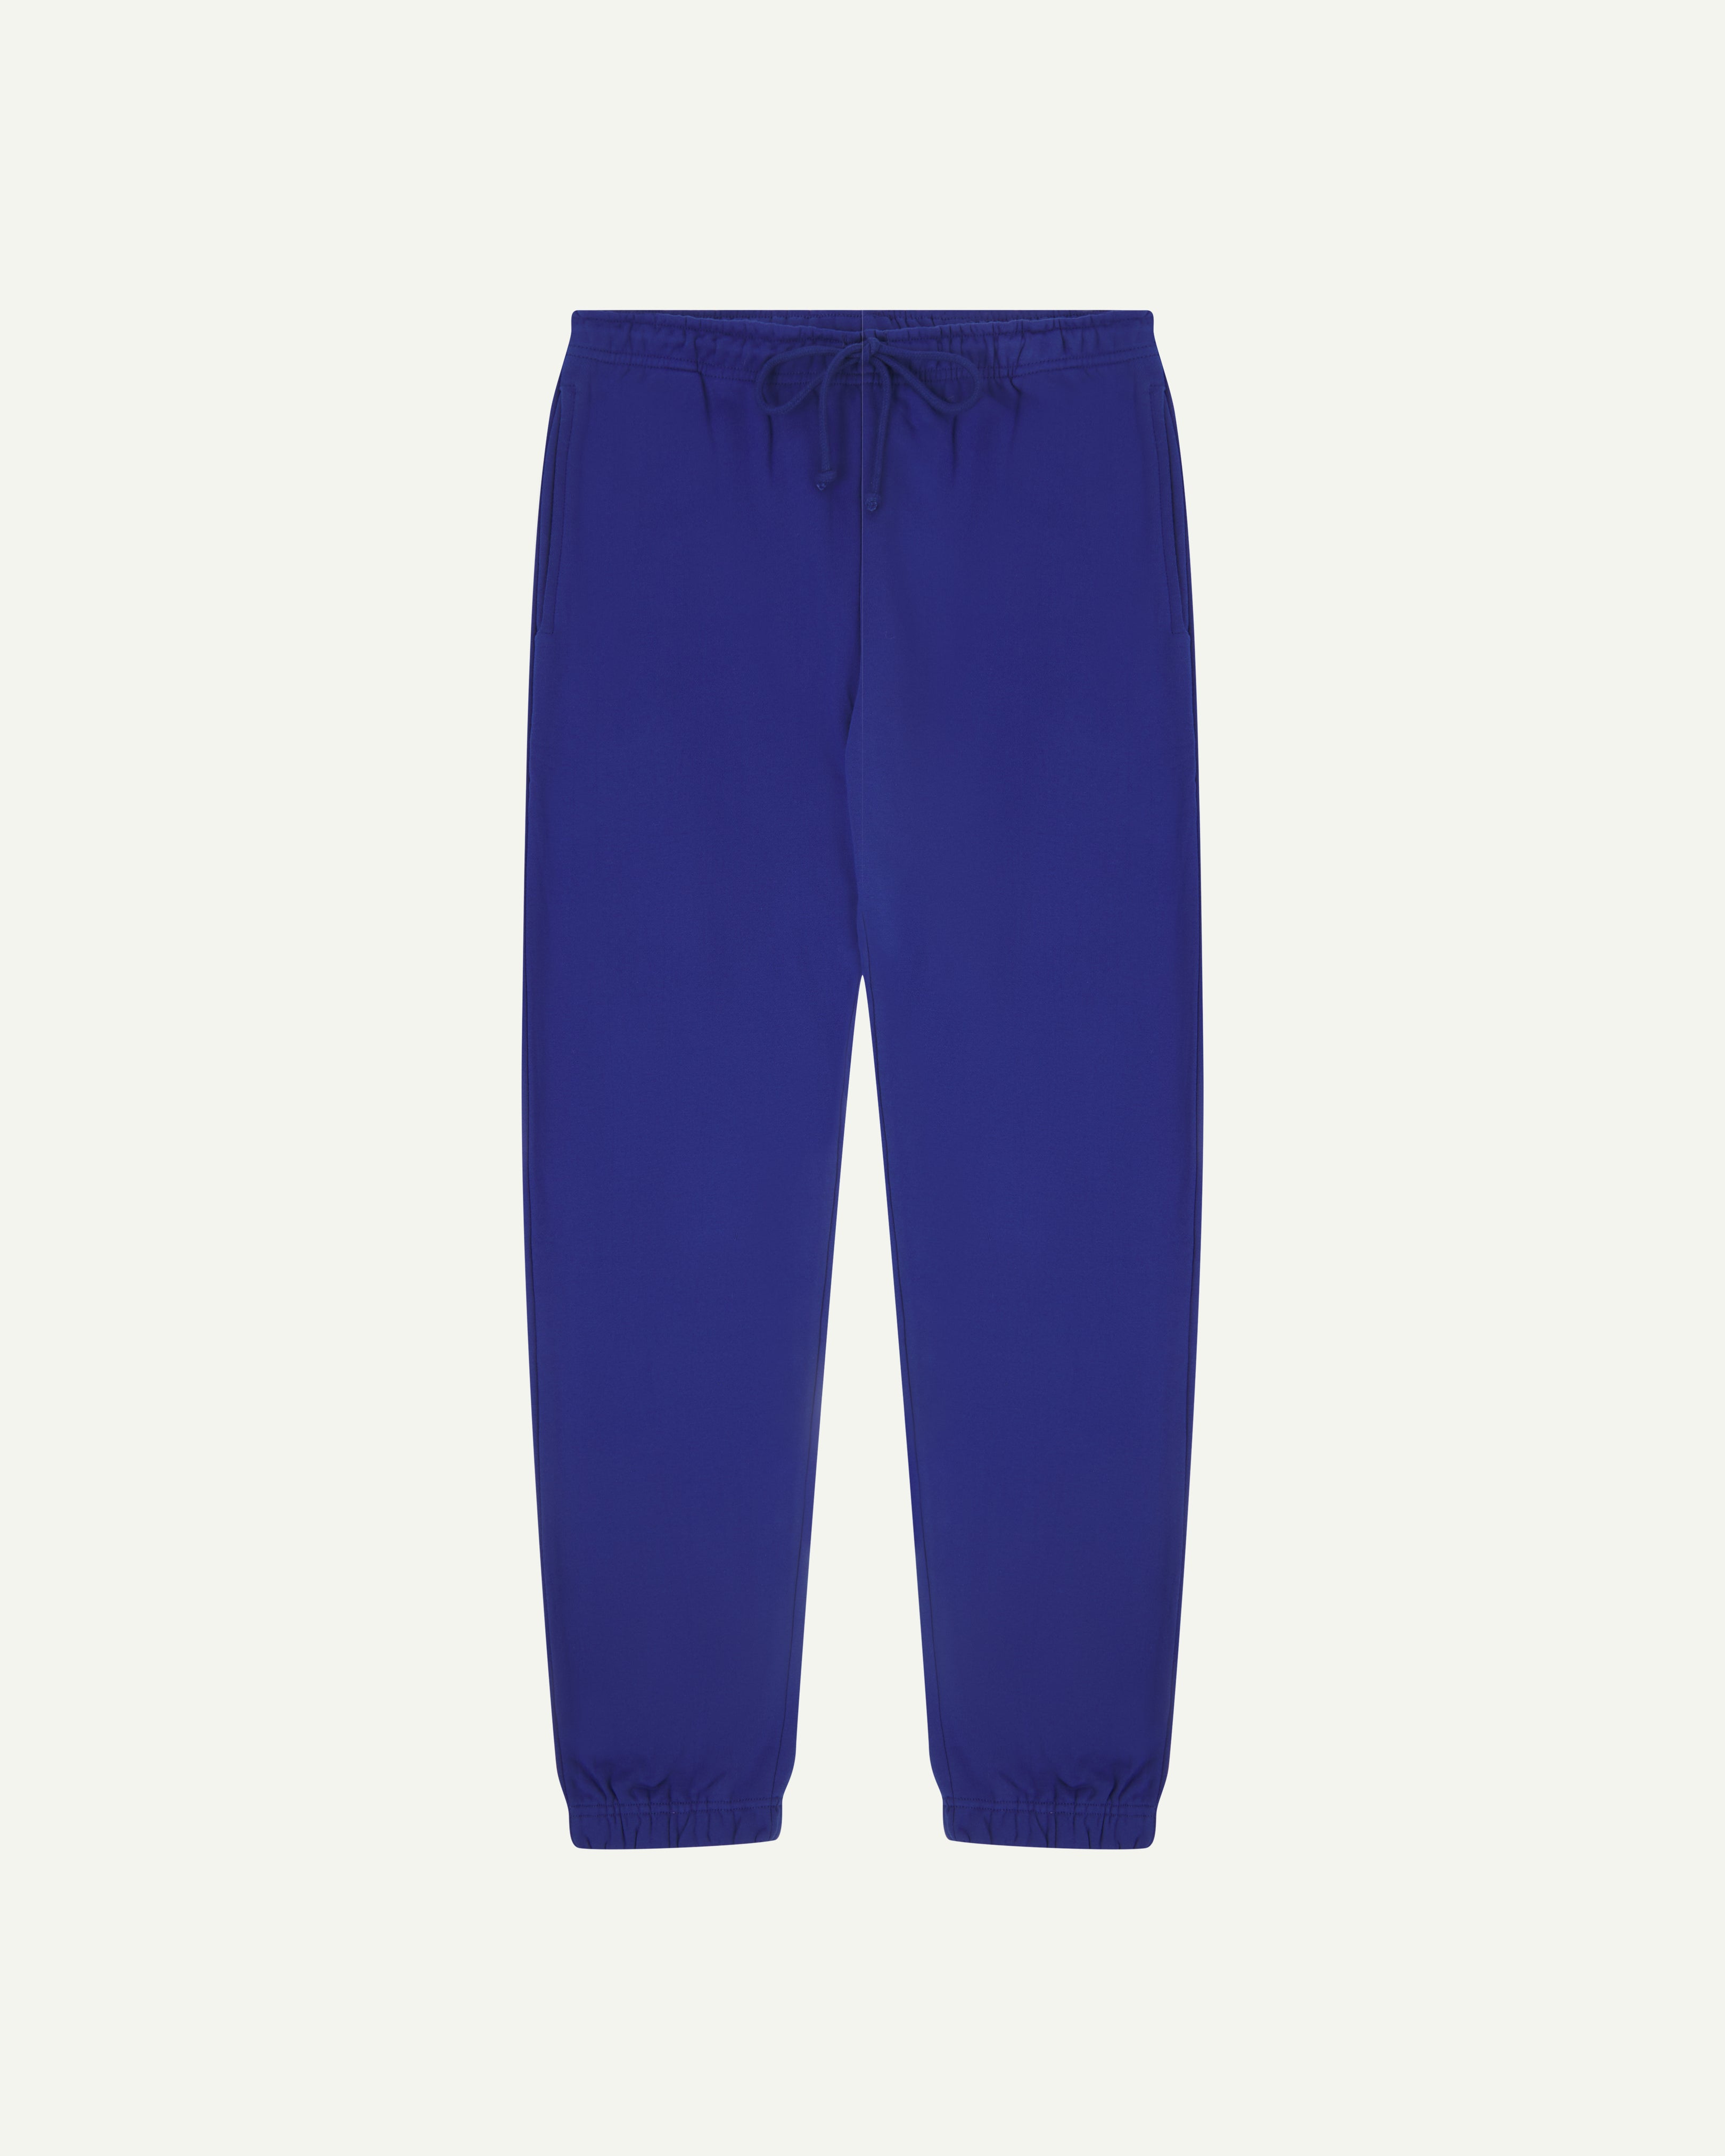 Front view of bright blue organic cotton Jogging Pants for men by Uskees.